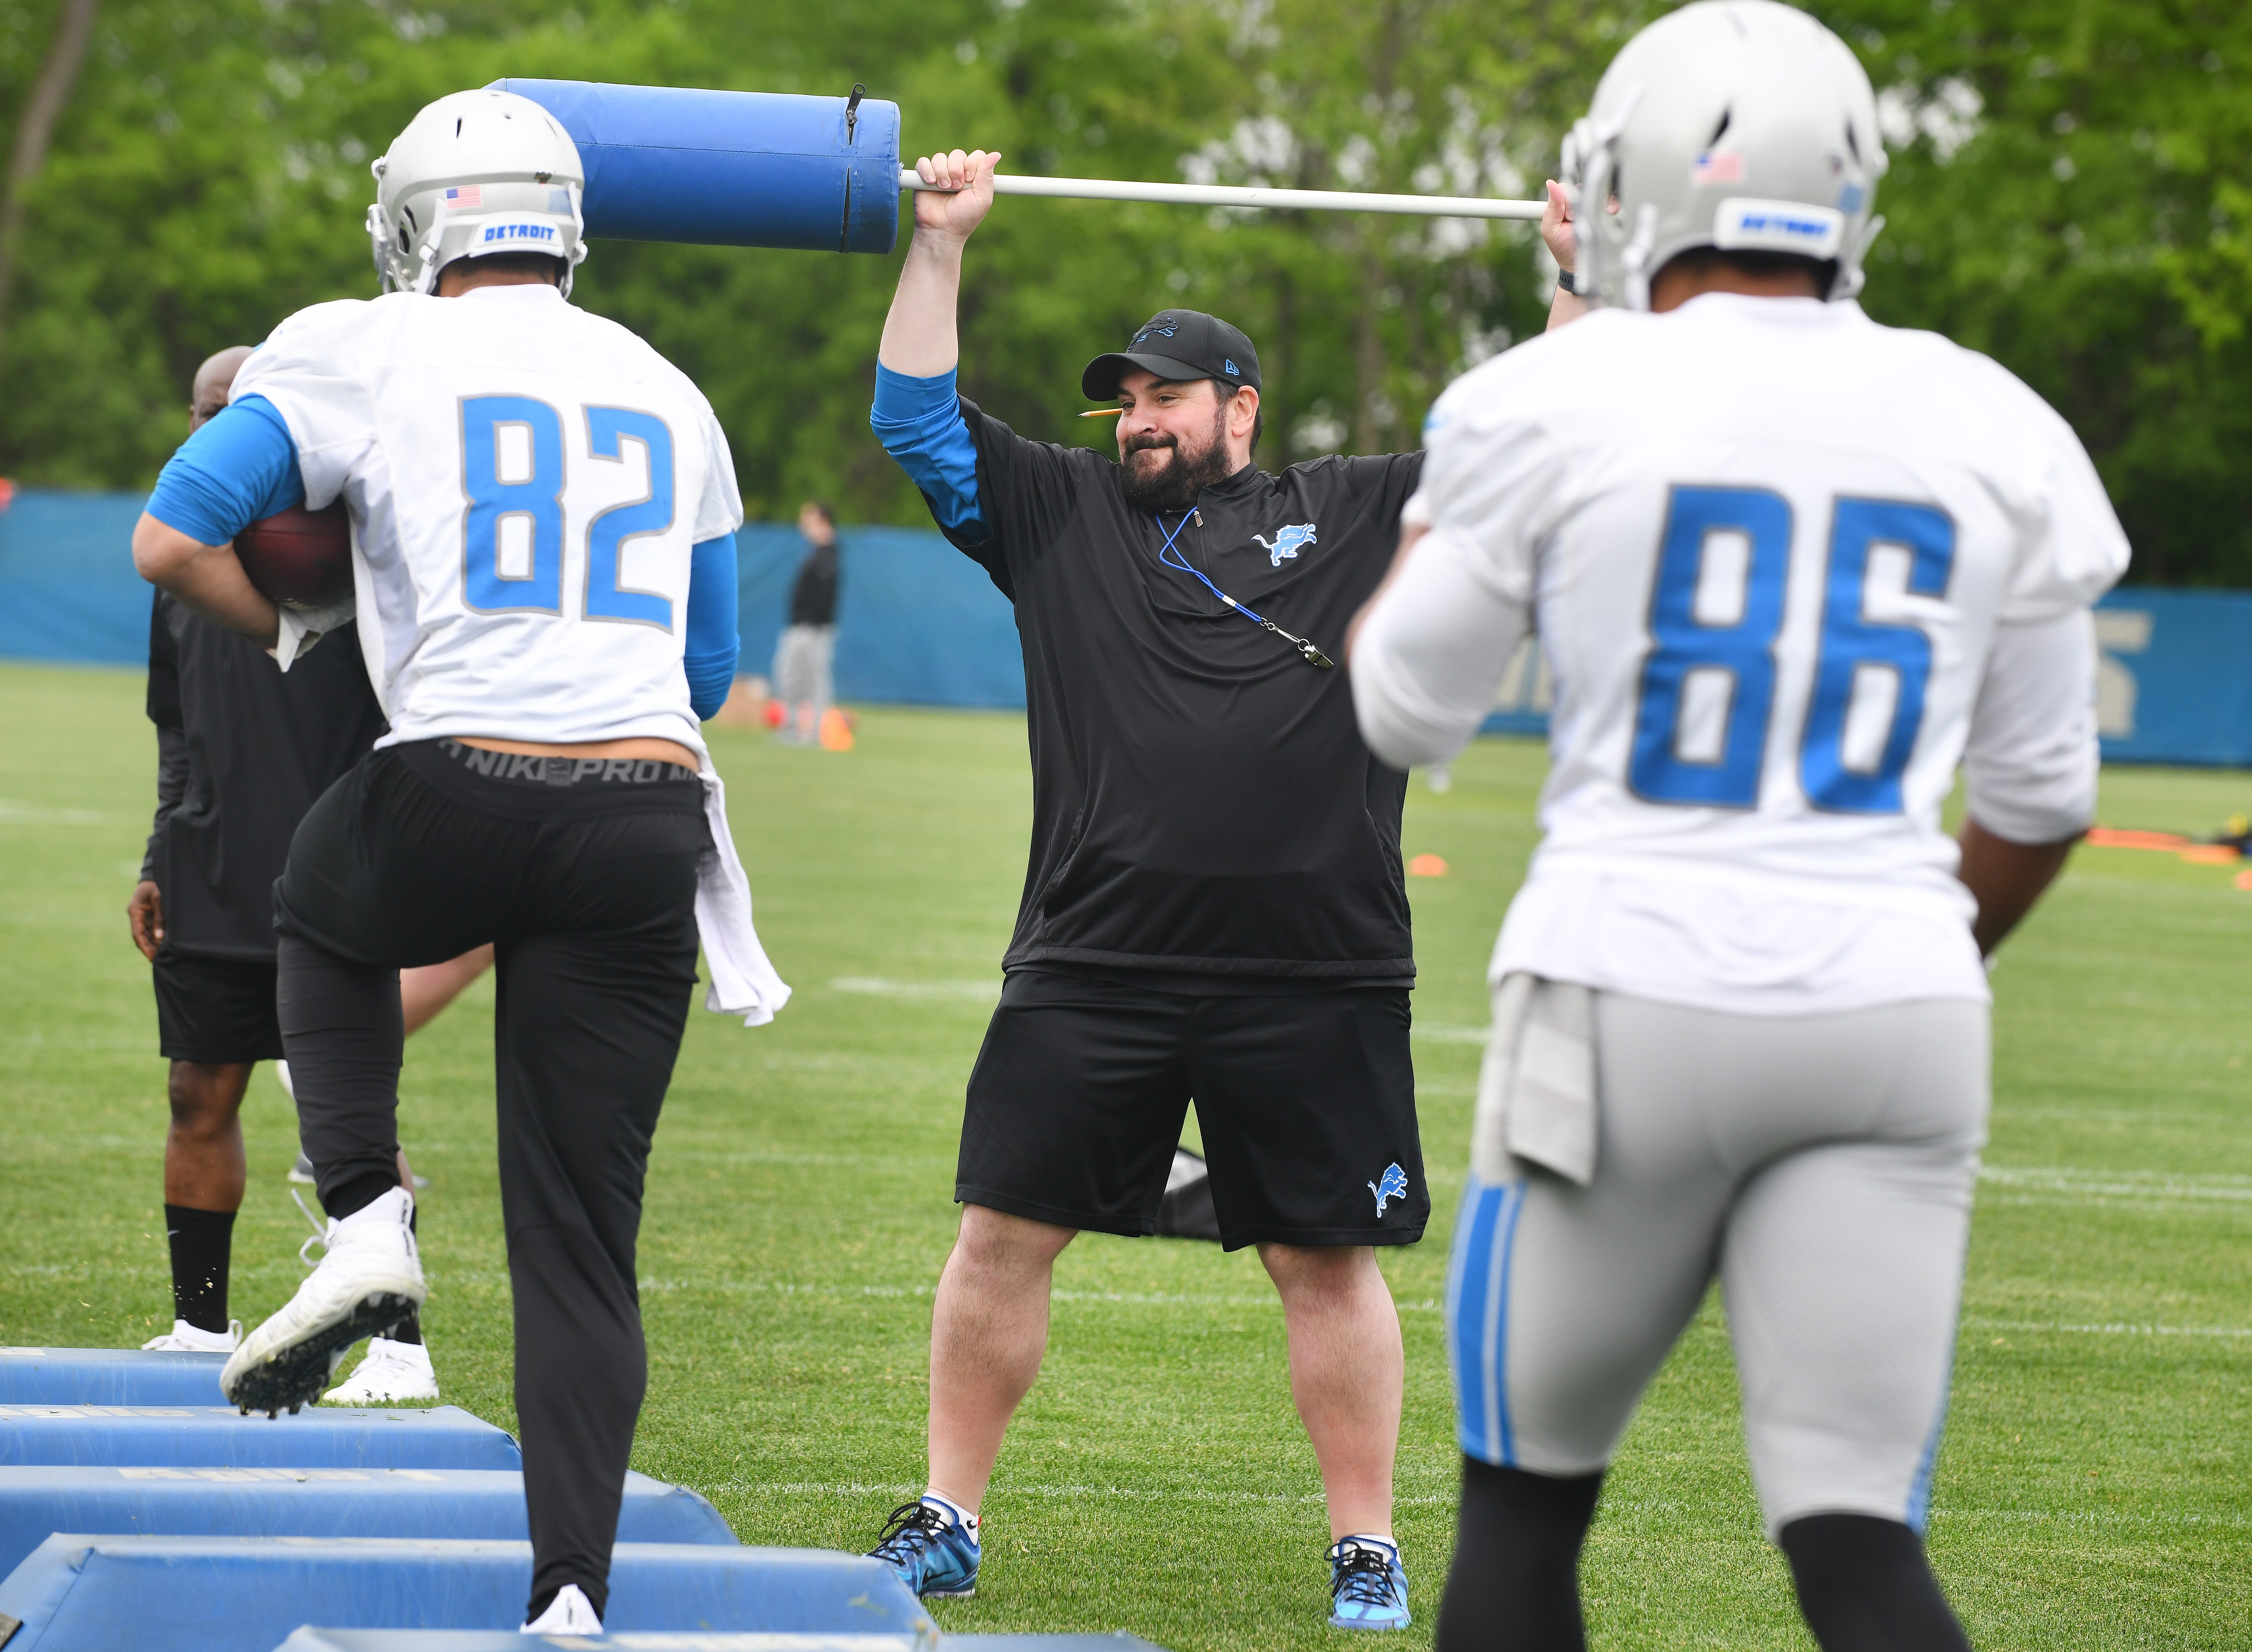 Lions head coach Matt Patricia adds some pop to the obstacles drill during OTA on Tuesday.  Detroit Lions press conference with head coach Matt Patricia at the training facility in Allen Park, Michigan on May 21, 2019.   (Image by Daniel Mears/ The Detroit News).